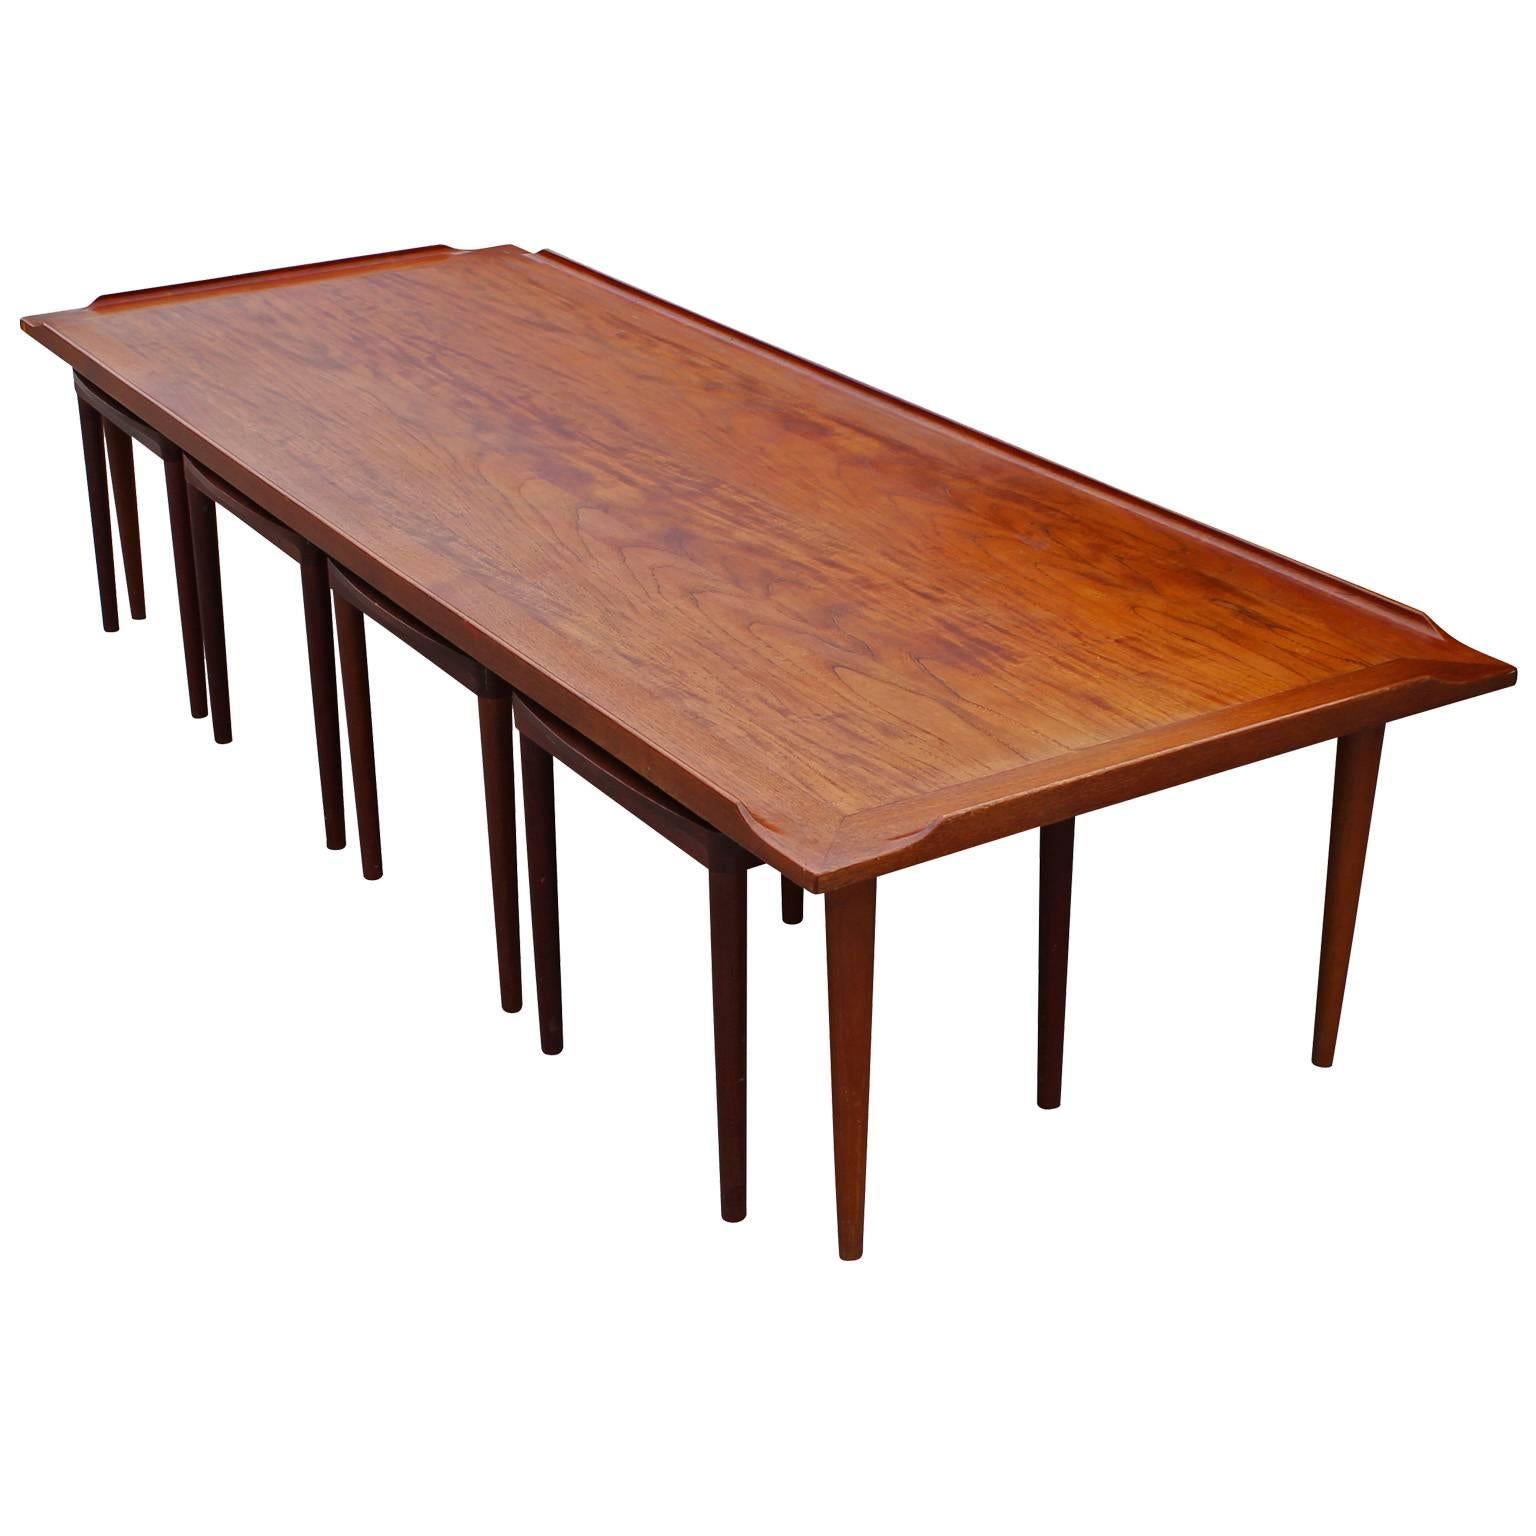 Rare large teak coffee table made in Denmark with four removable stools/ side tables. The table has elegant curved lip on the top with beautiful grain. Four removable tables store underneath. Each table has top that can flipped to show a vintage